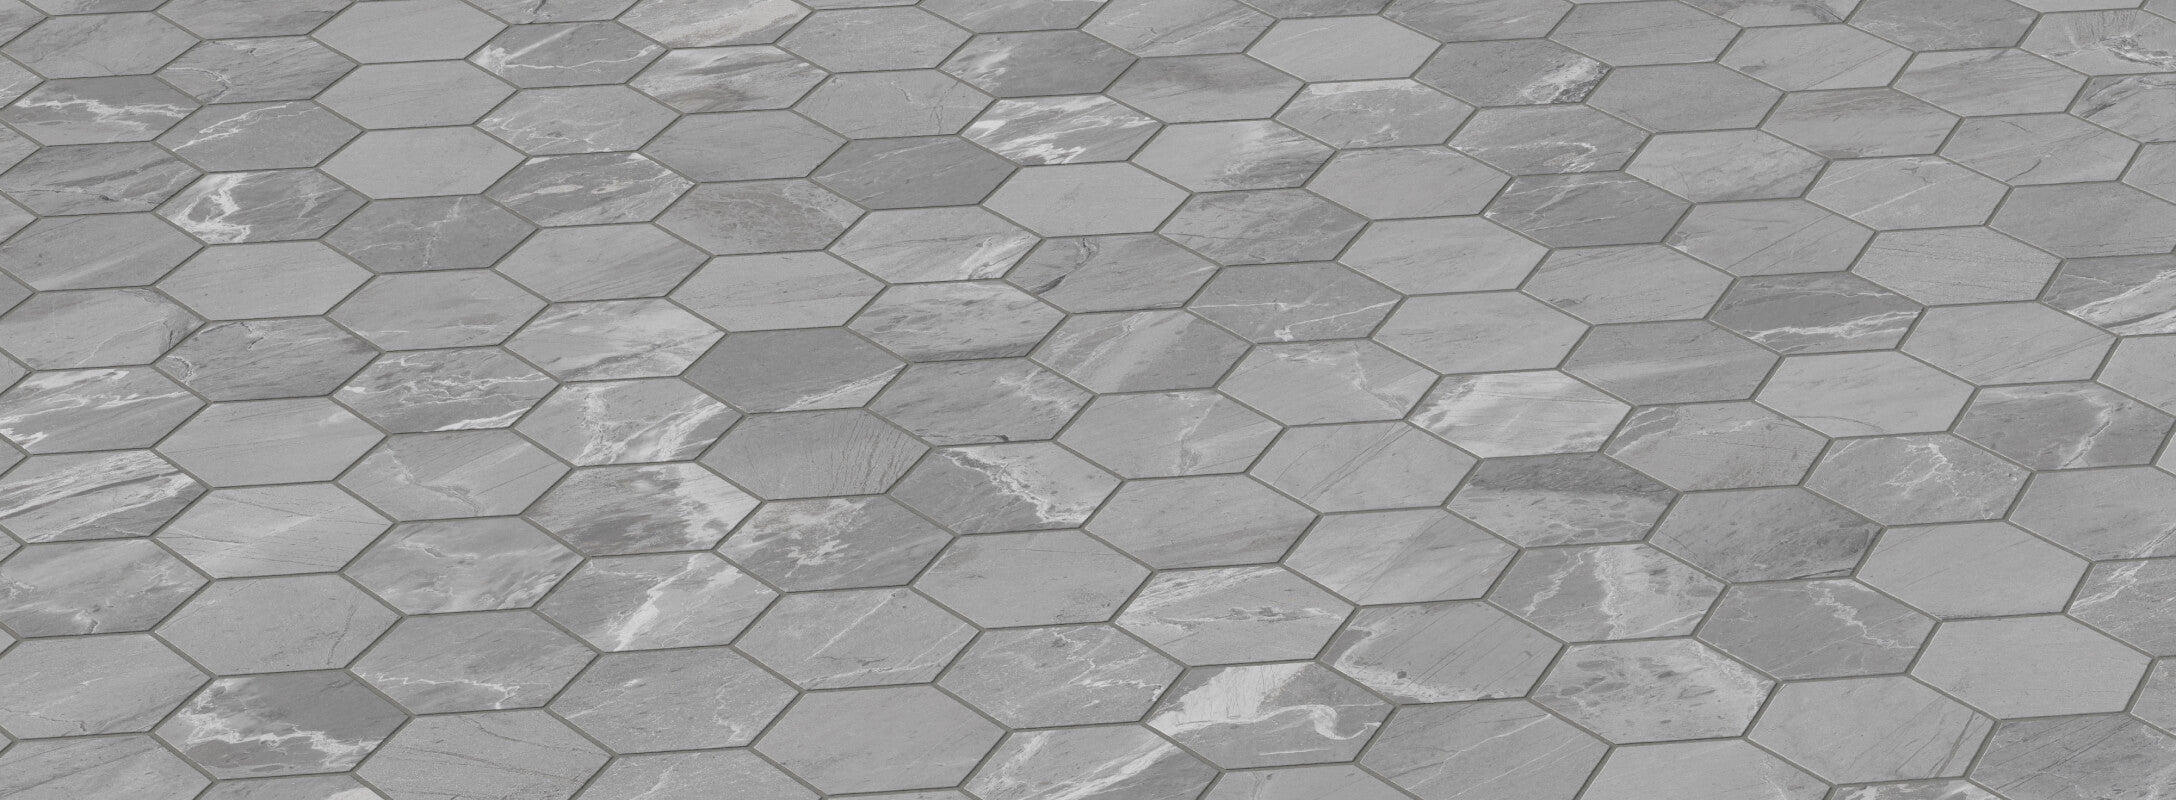 Dark grey hexagonal tiles with a subtle marble-like texture, creating a sleek and contemporary shower floor